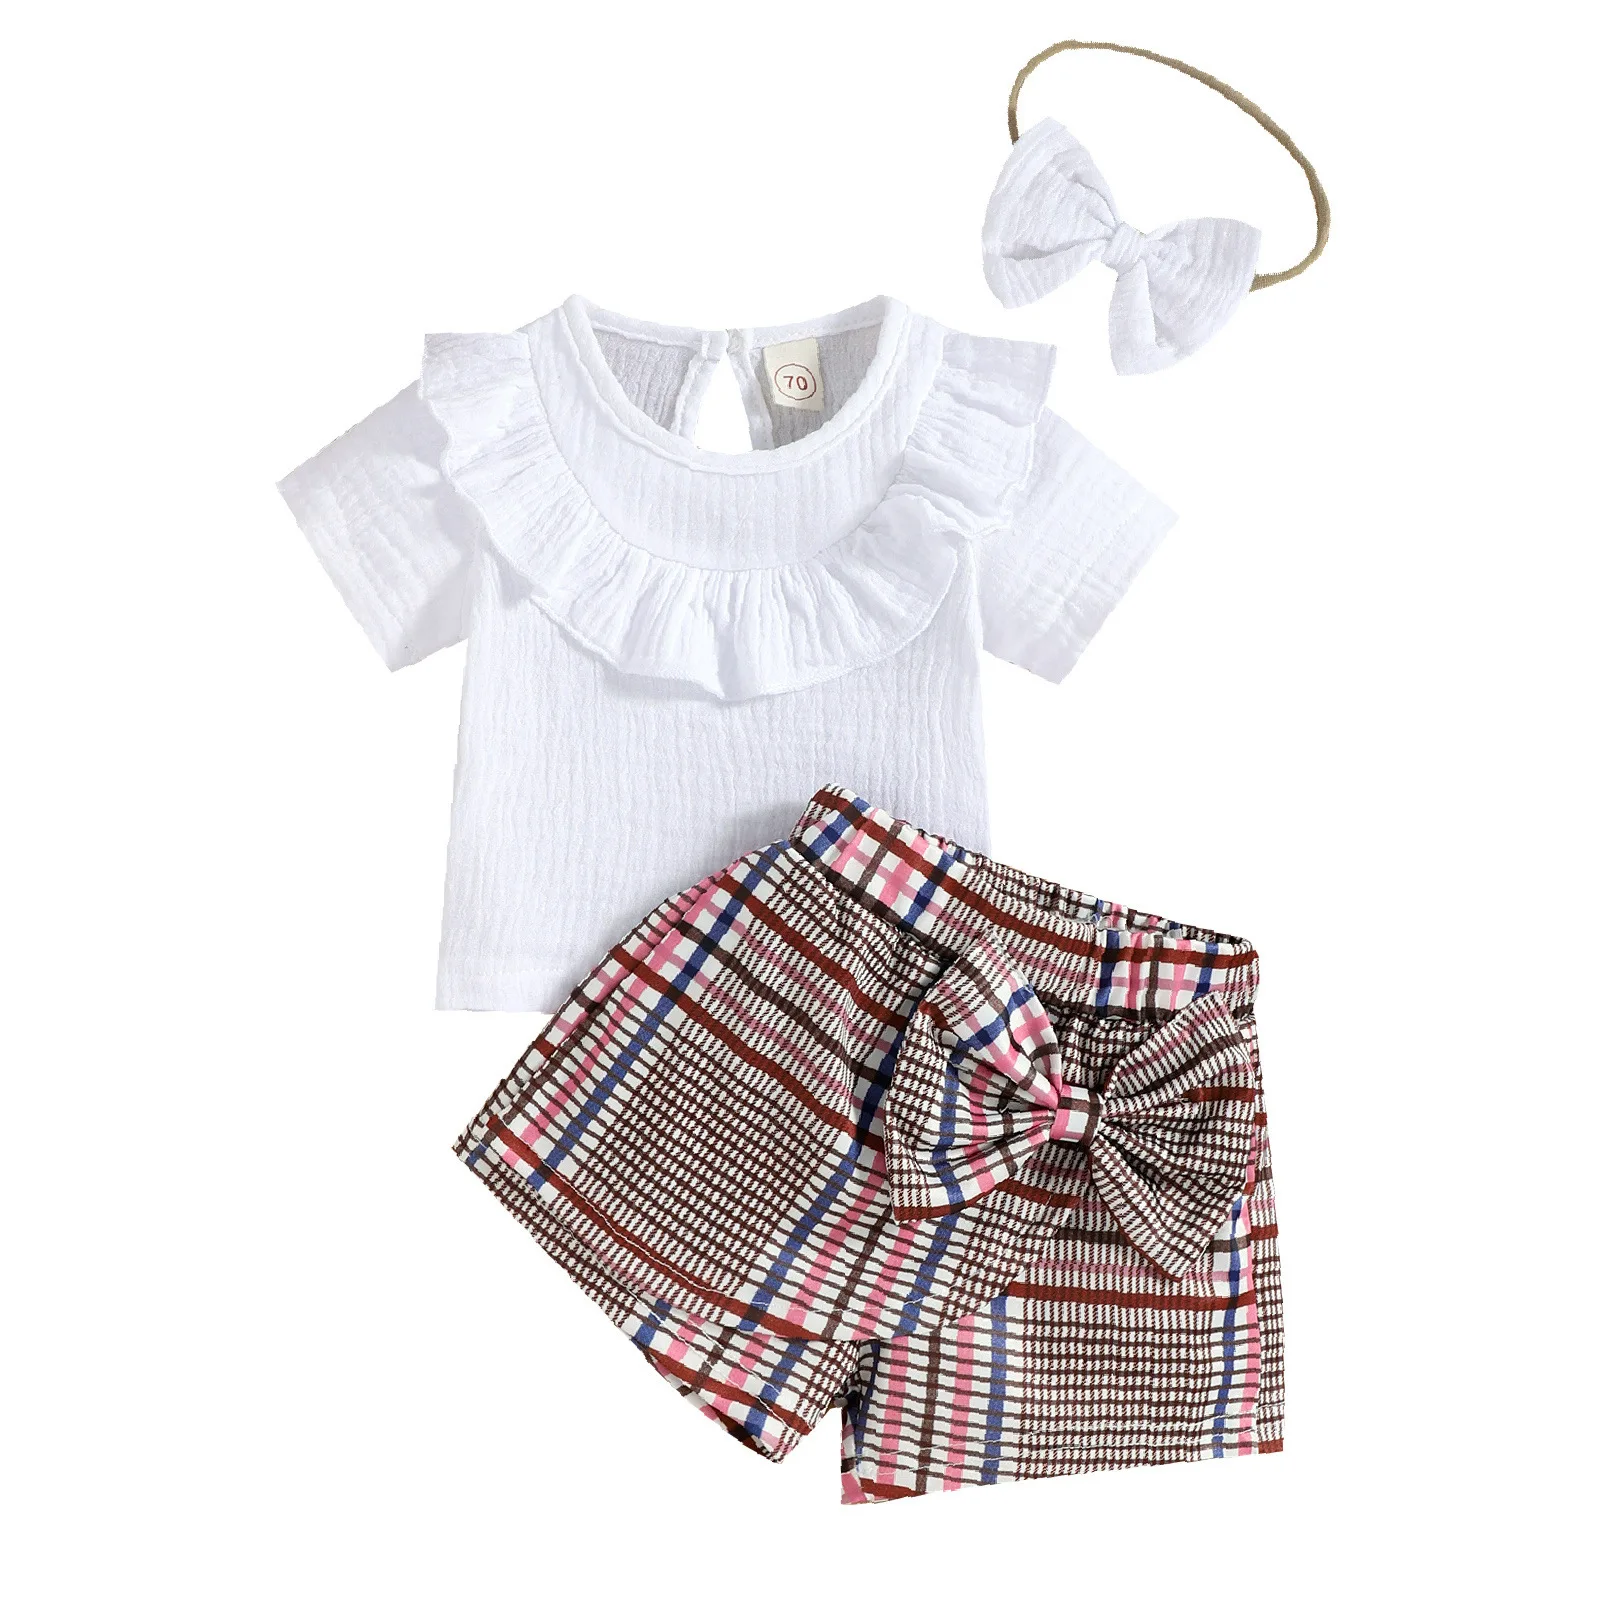 New Baby Girls Clothing Outfits Summer Newborn Infant Sleeveless T-shirt Plaid Shorts 3Pcs/Sets Clothes Casual Sports Tracksuits